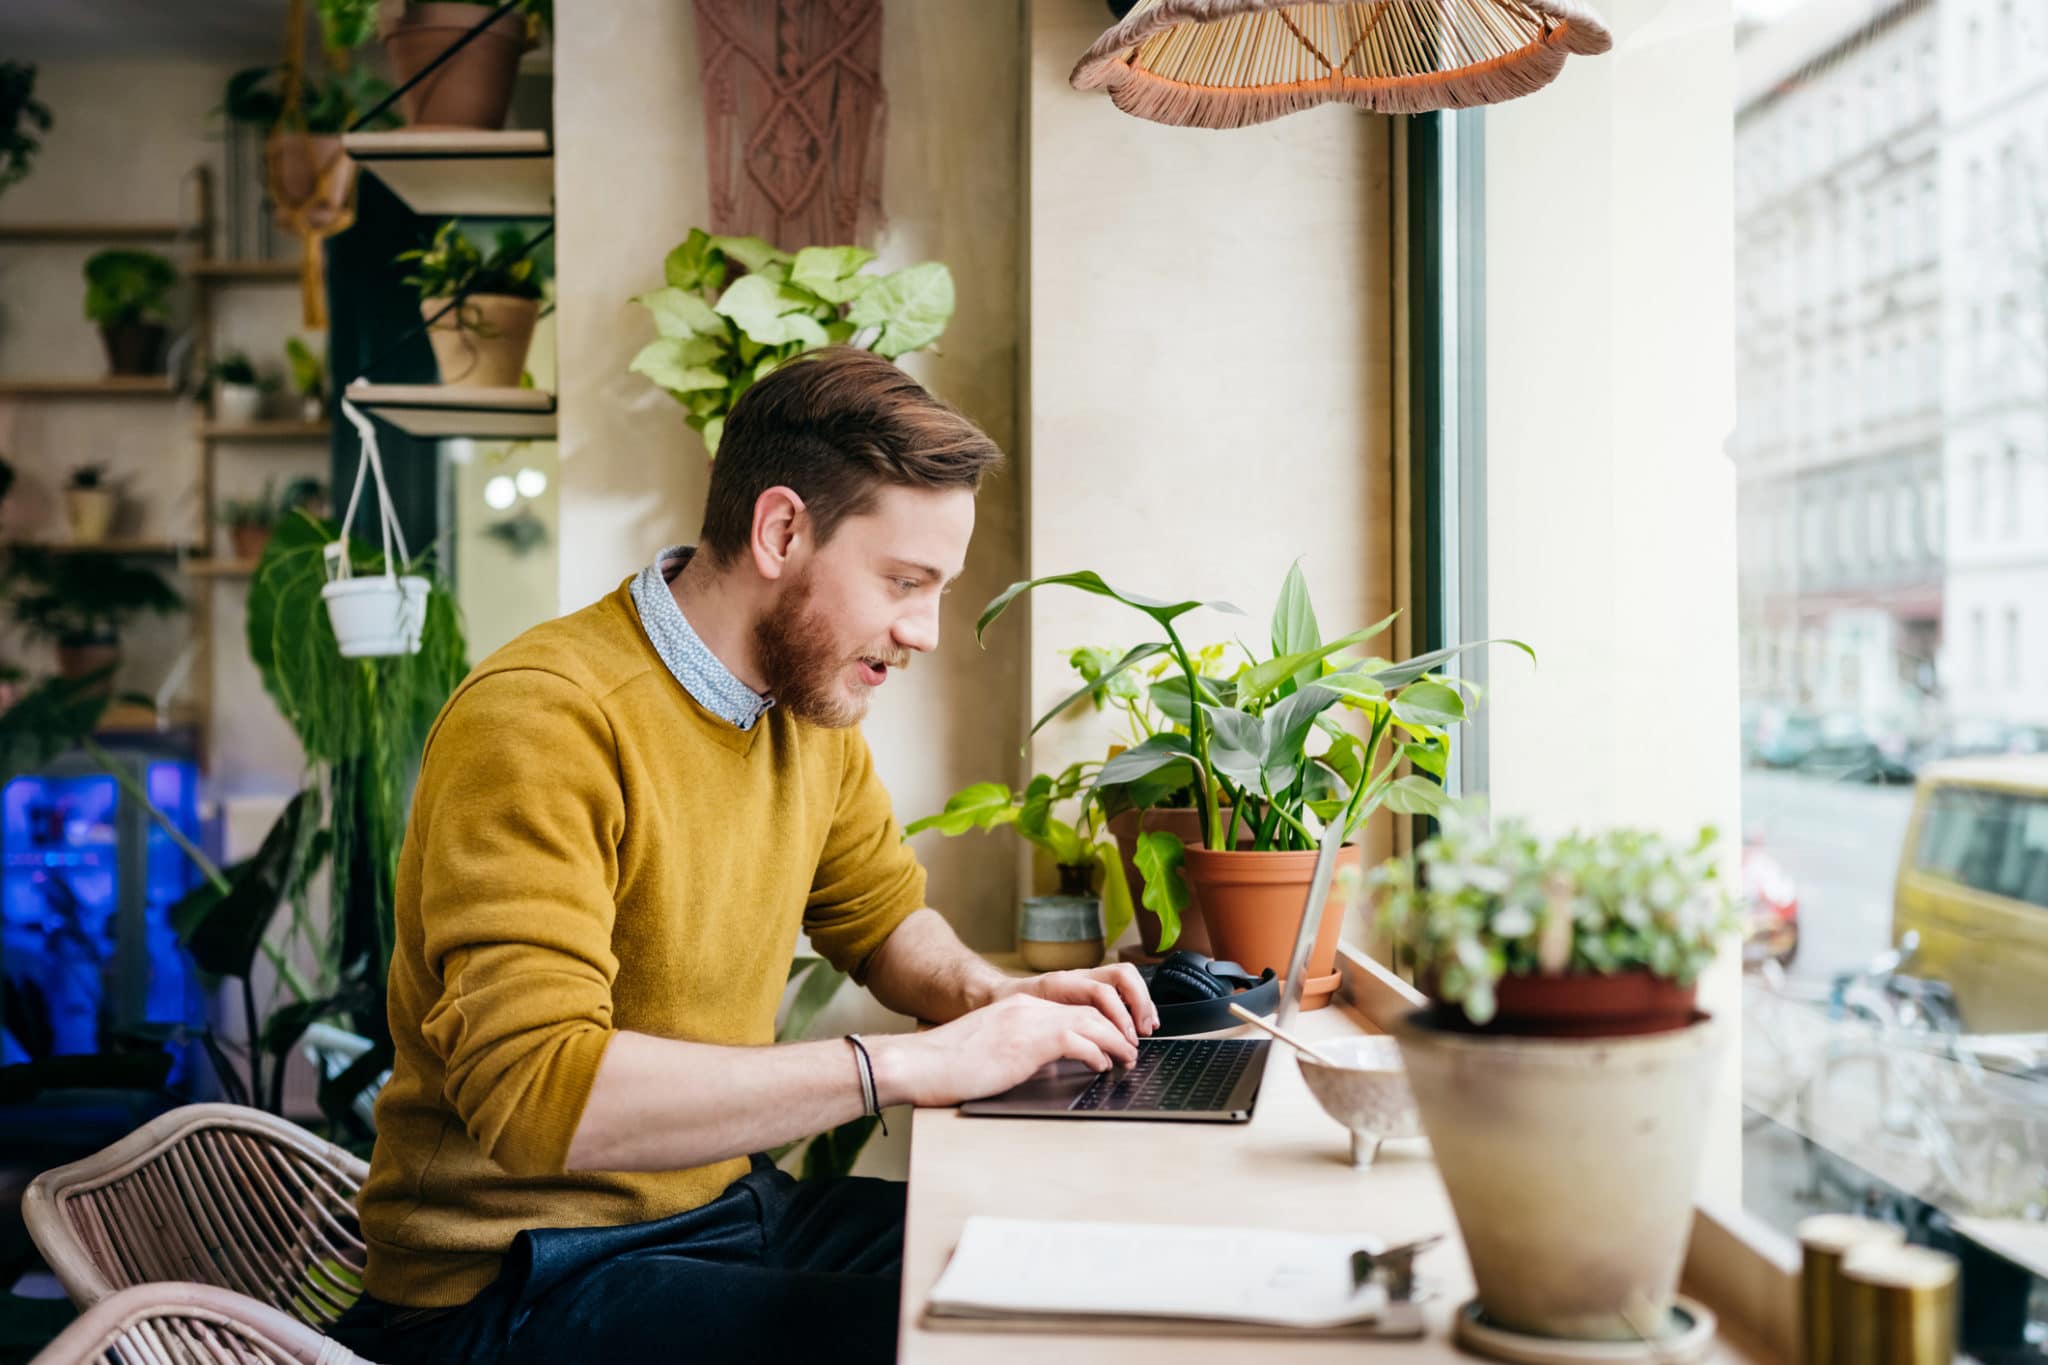 A young man sitting in a small café filled with green plants using his laptop.